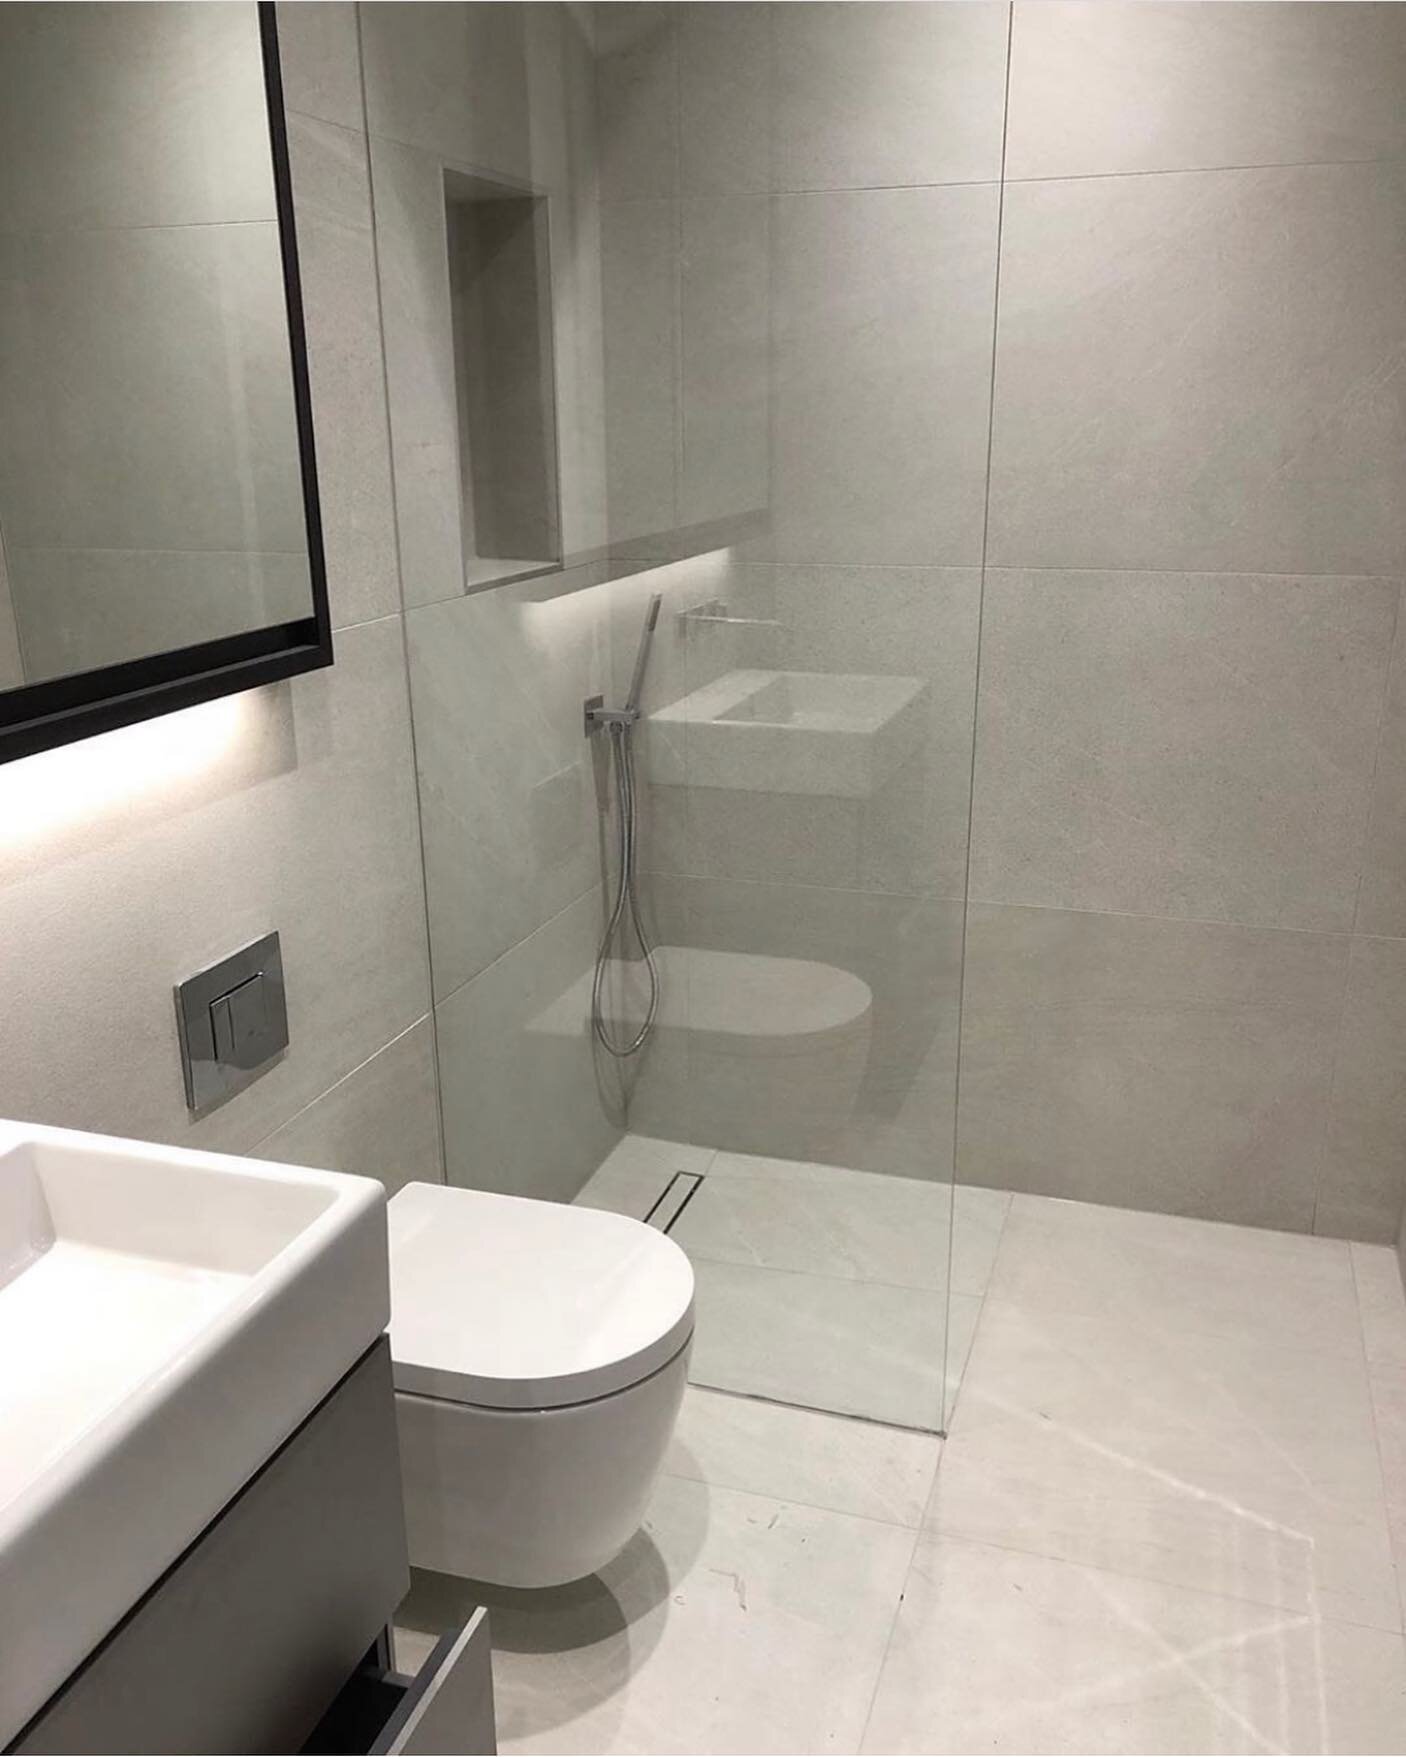 A completed wet room using porcelain tiles supplied by @bocchettaceramica 
.
.
.
.
.
.
.
.
#luxuryhomes #luxurybathrooms #bathroomdesign #bathroom #bathroomdecor #living #luxury #luxurylifestyle #decor #tiles #tiling #tilingwork #tileshower #bathroom